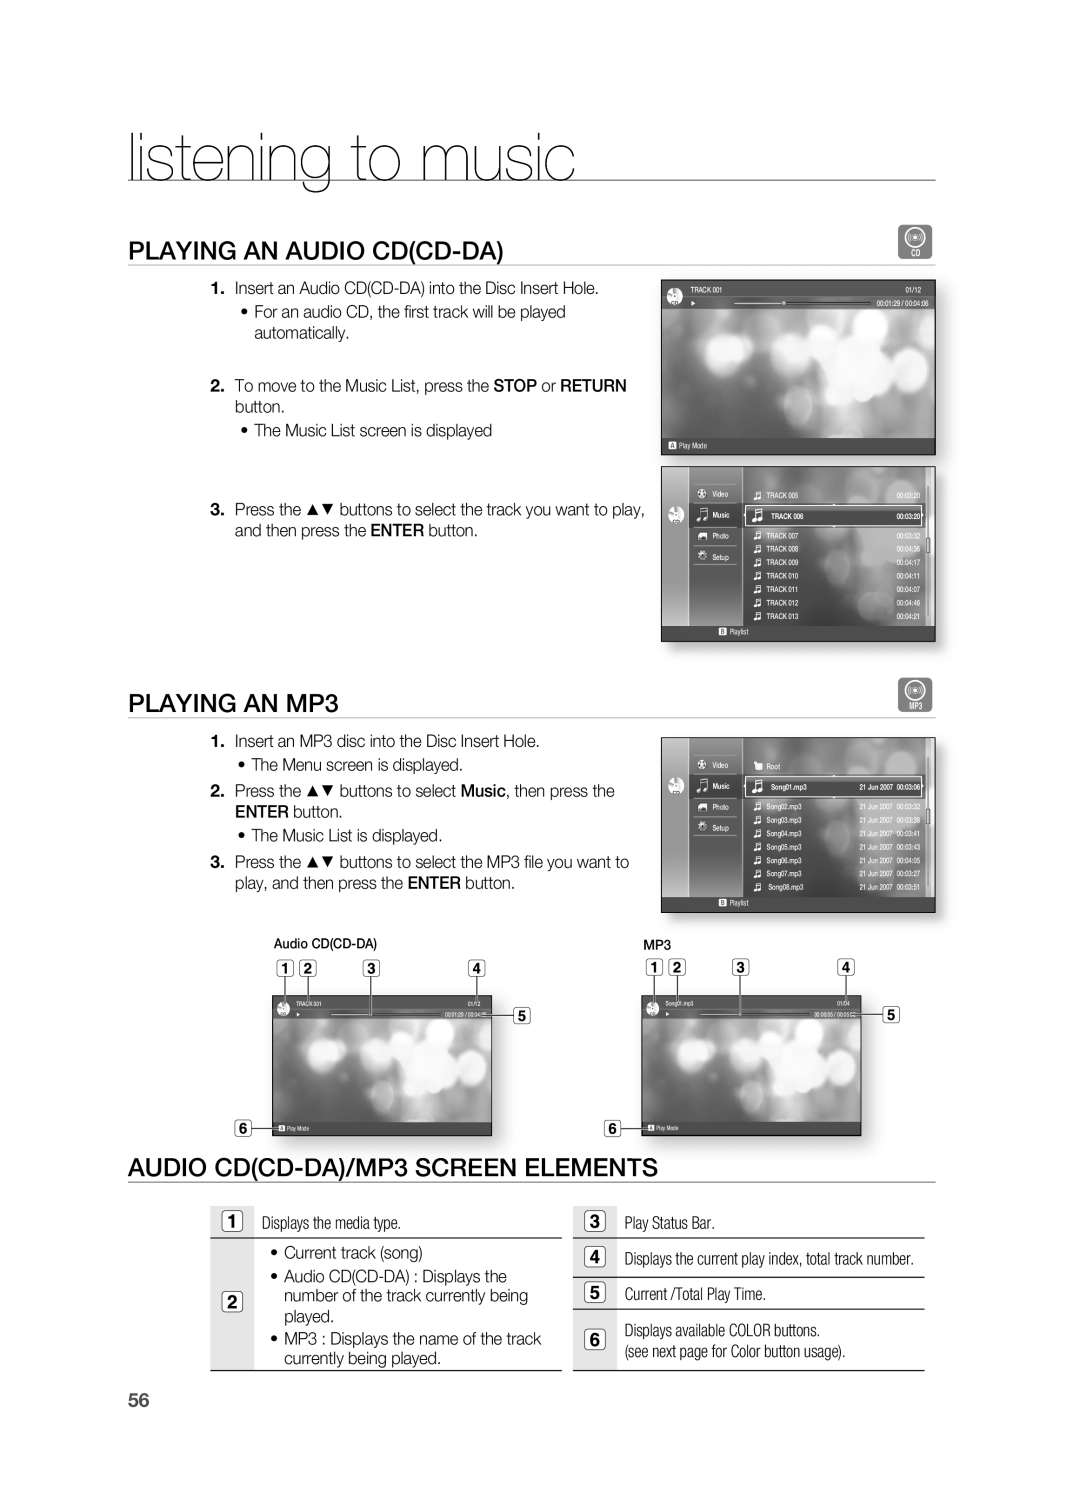 Samsung HT-BD2 manual listening to music, Playing An Audio Cdcd-Da, PLAYING AN MP3, Elements 